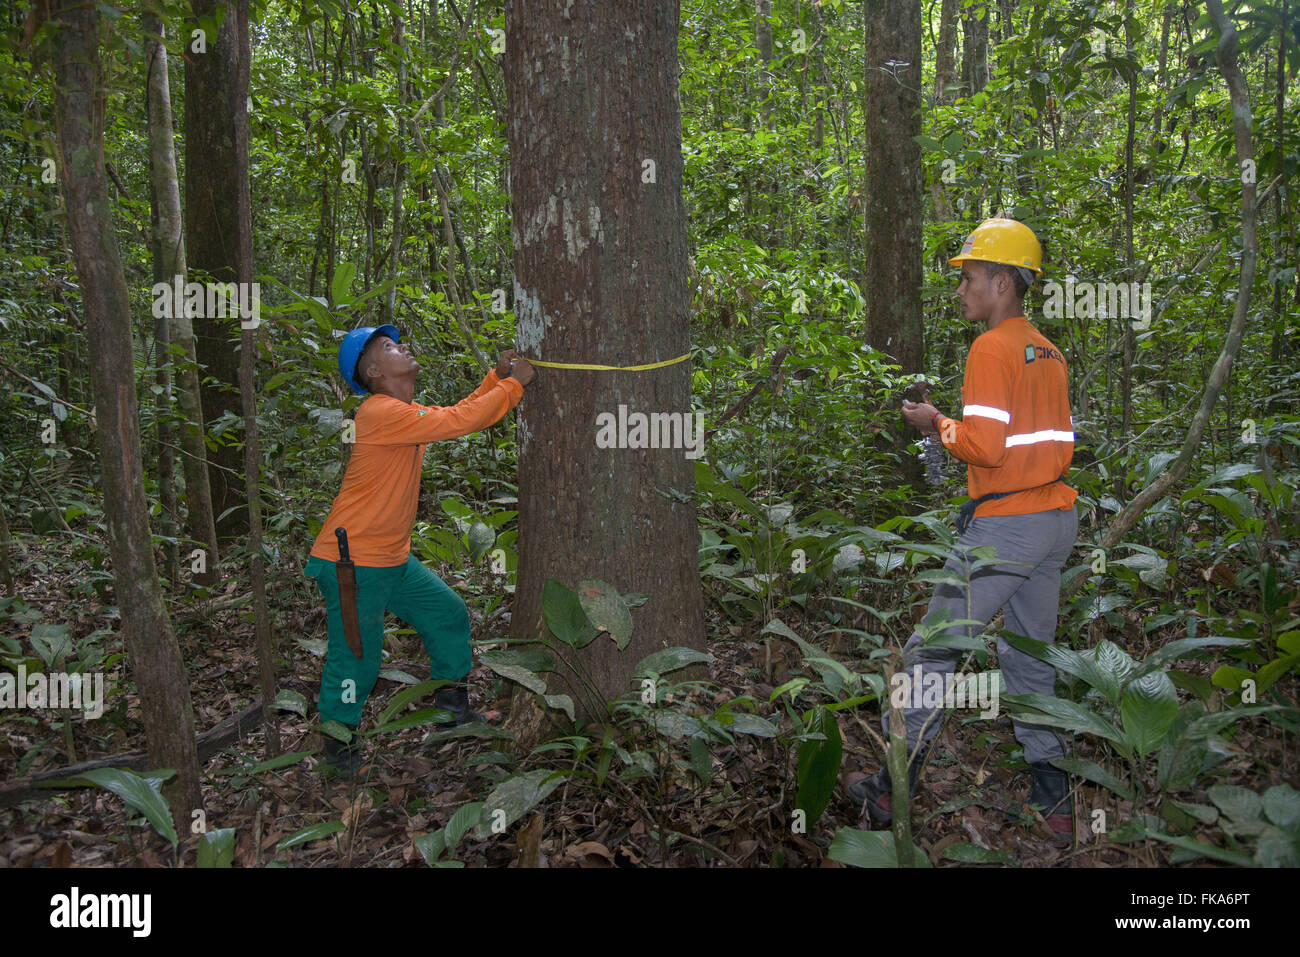 Team working by measuring the diameter of tree to inventory in work unit Stock Photo